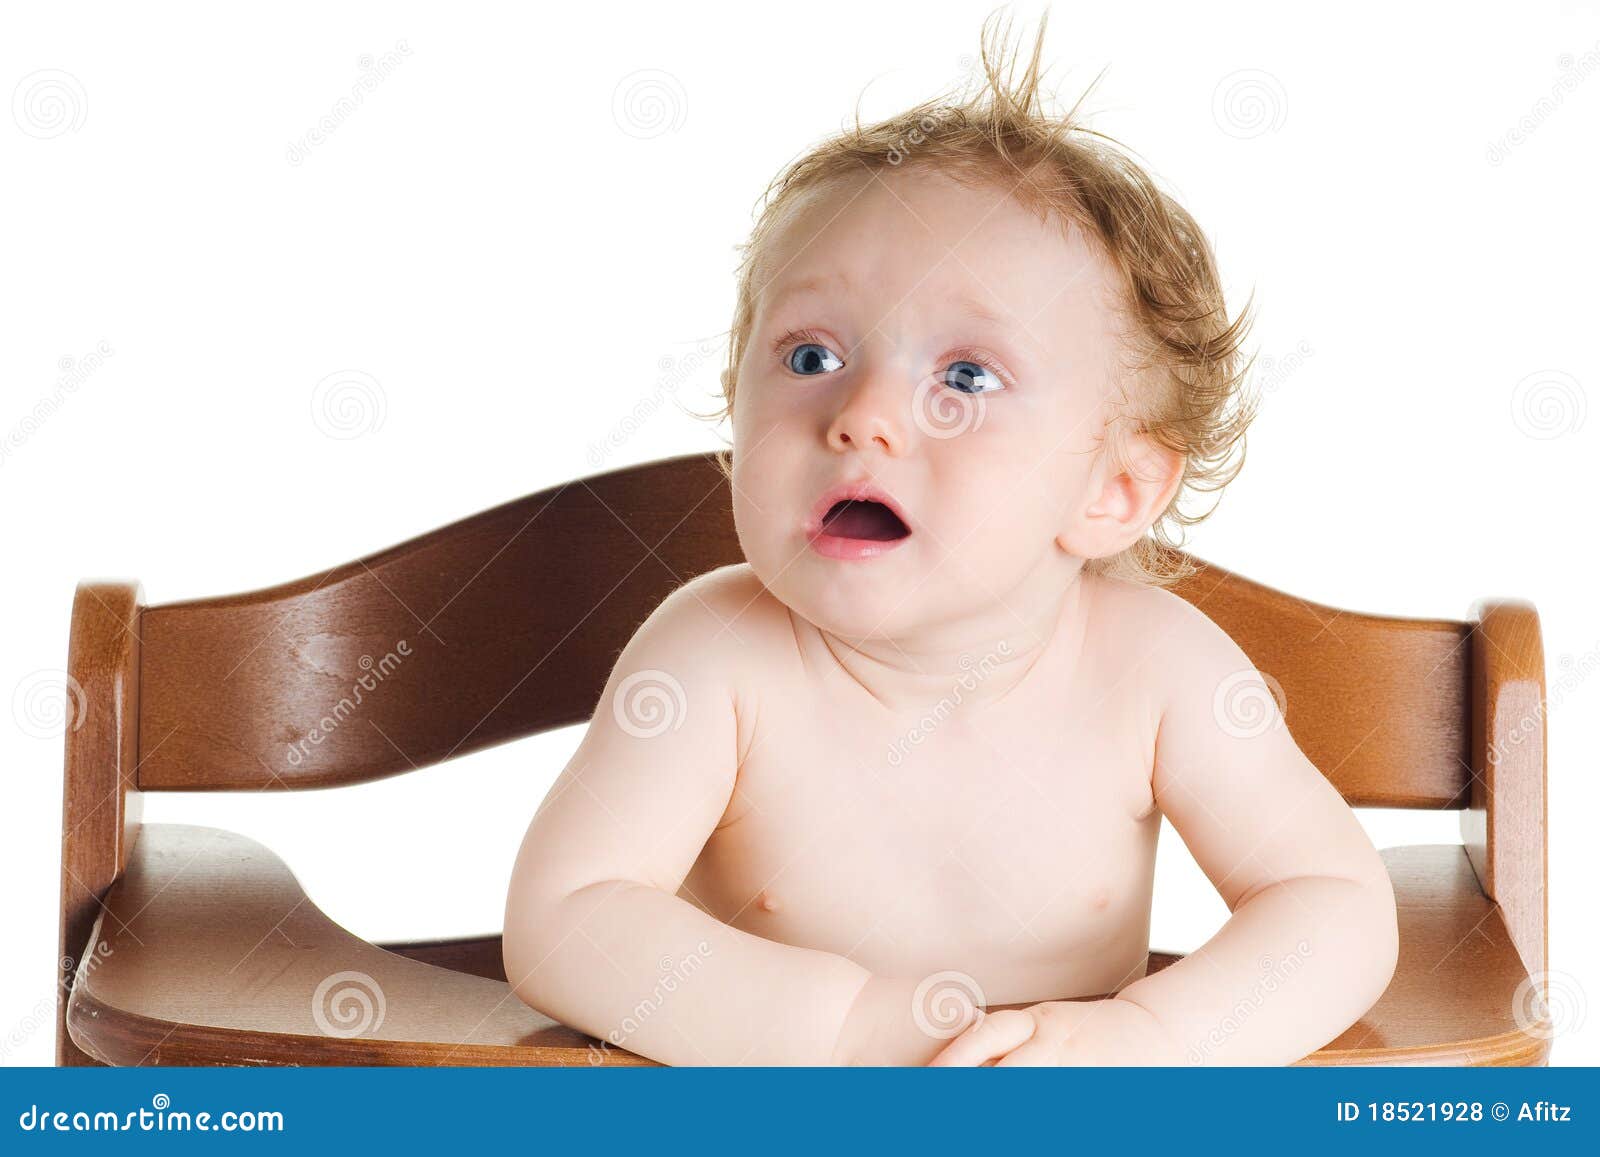 Hungry baby high chair stock photo. Image of baby, hands ...